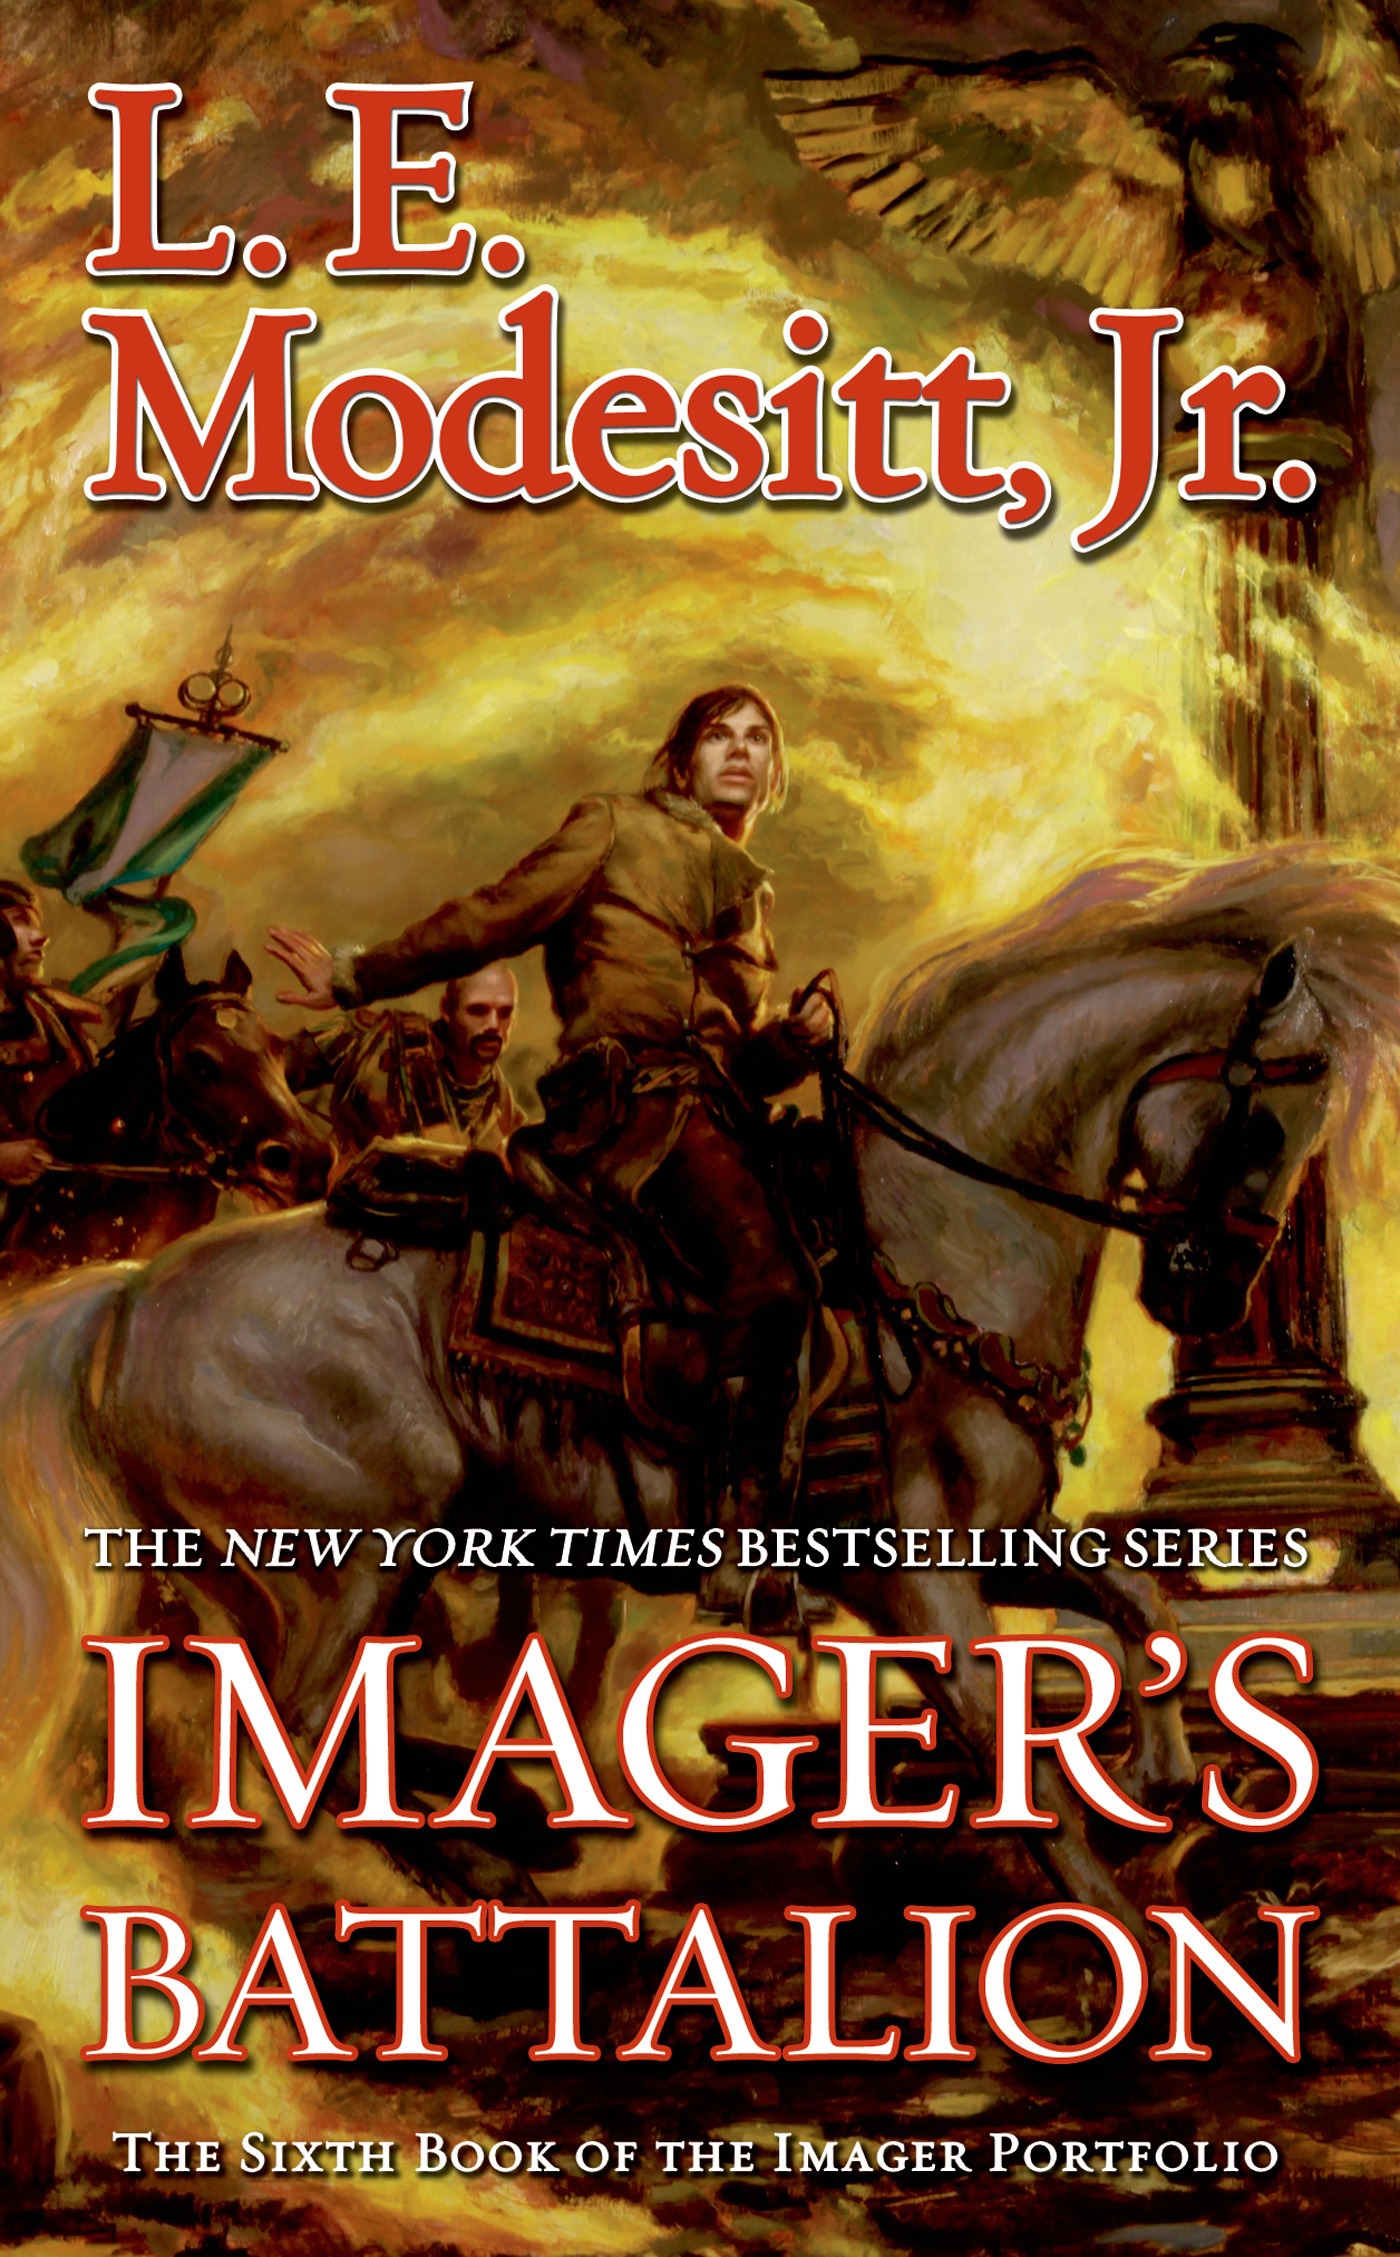 Imager's Battalion : The Sixth Book of the Imager Portfolio by L. E. Modesitt, Jr.